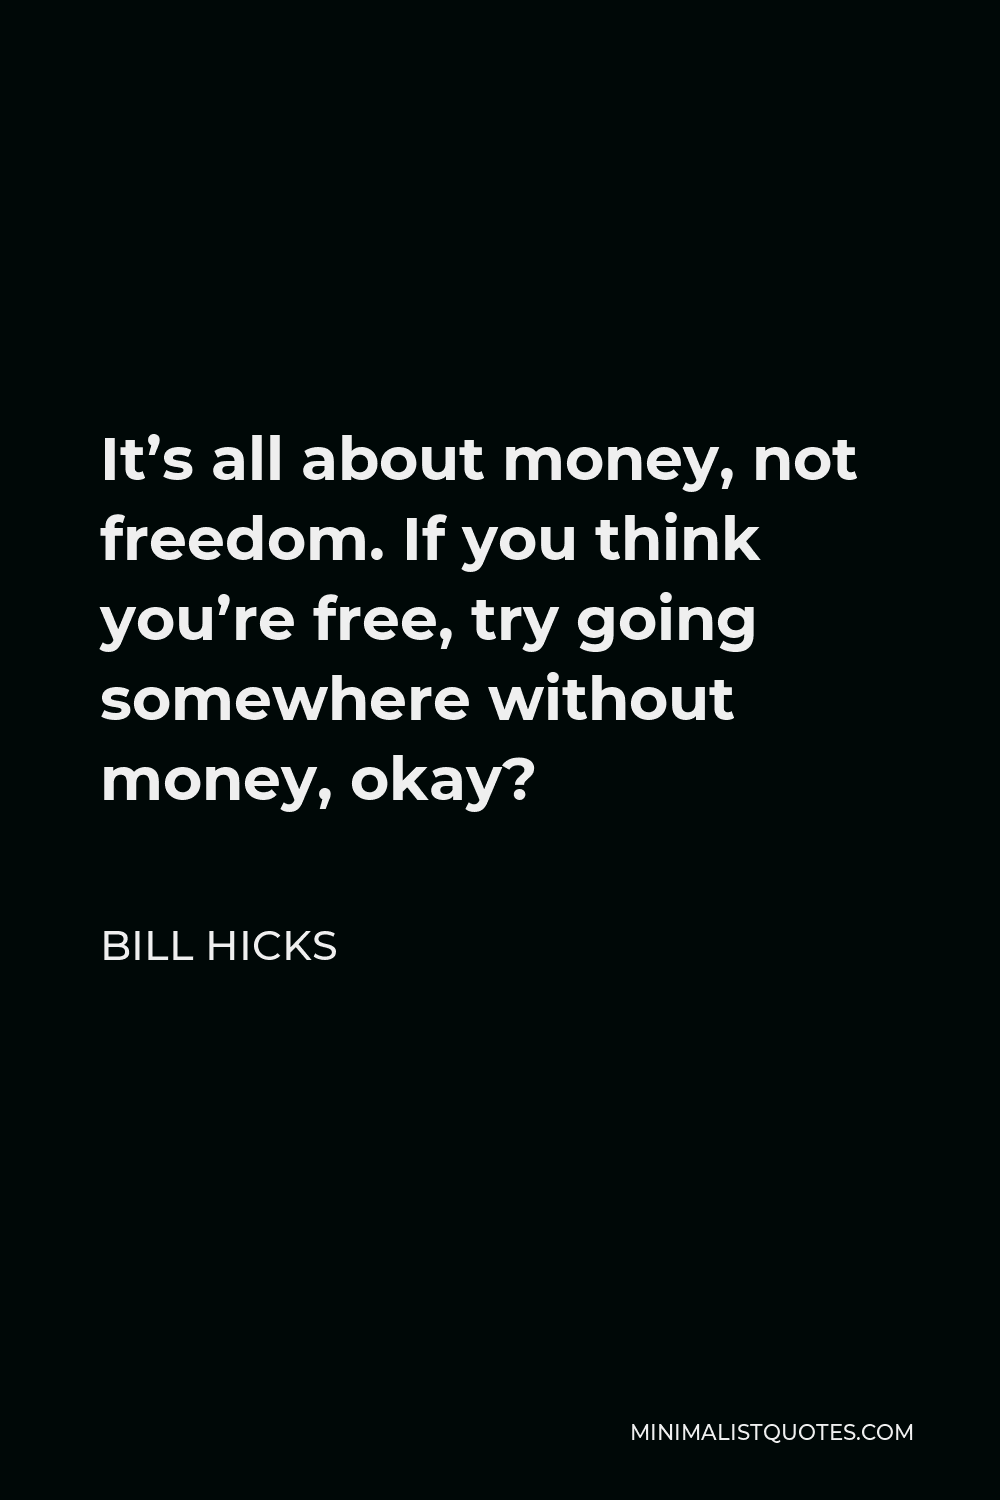 Bill Hicks Quote - It’s all about money, not freedom. If you think you’re free, try going somewhere without money, okay?